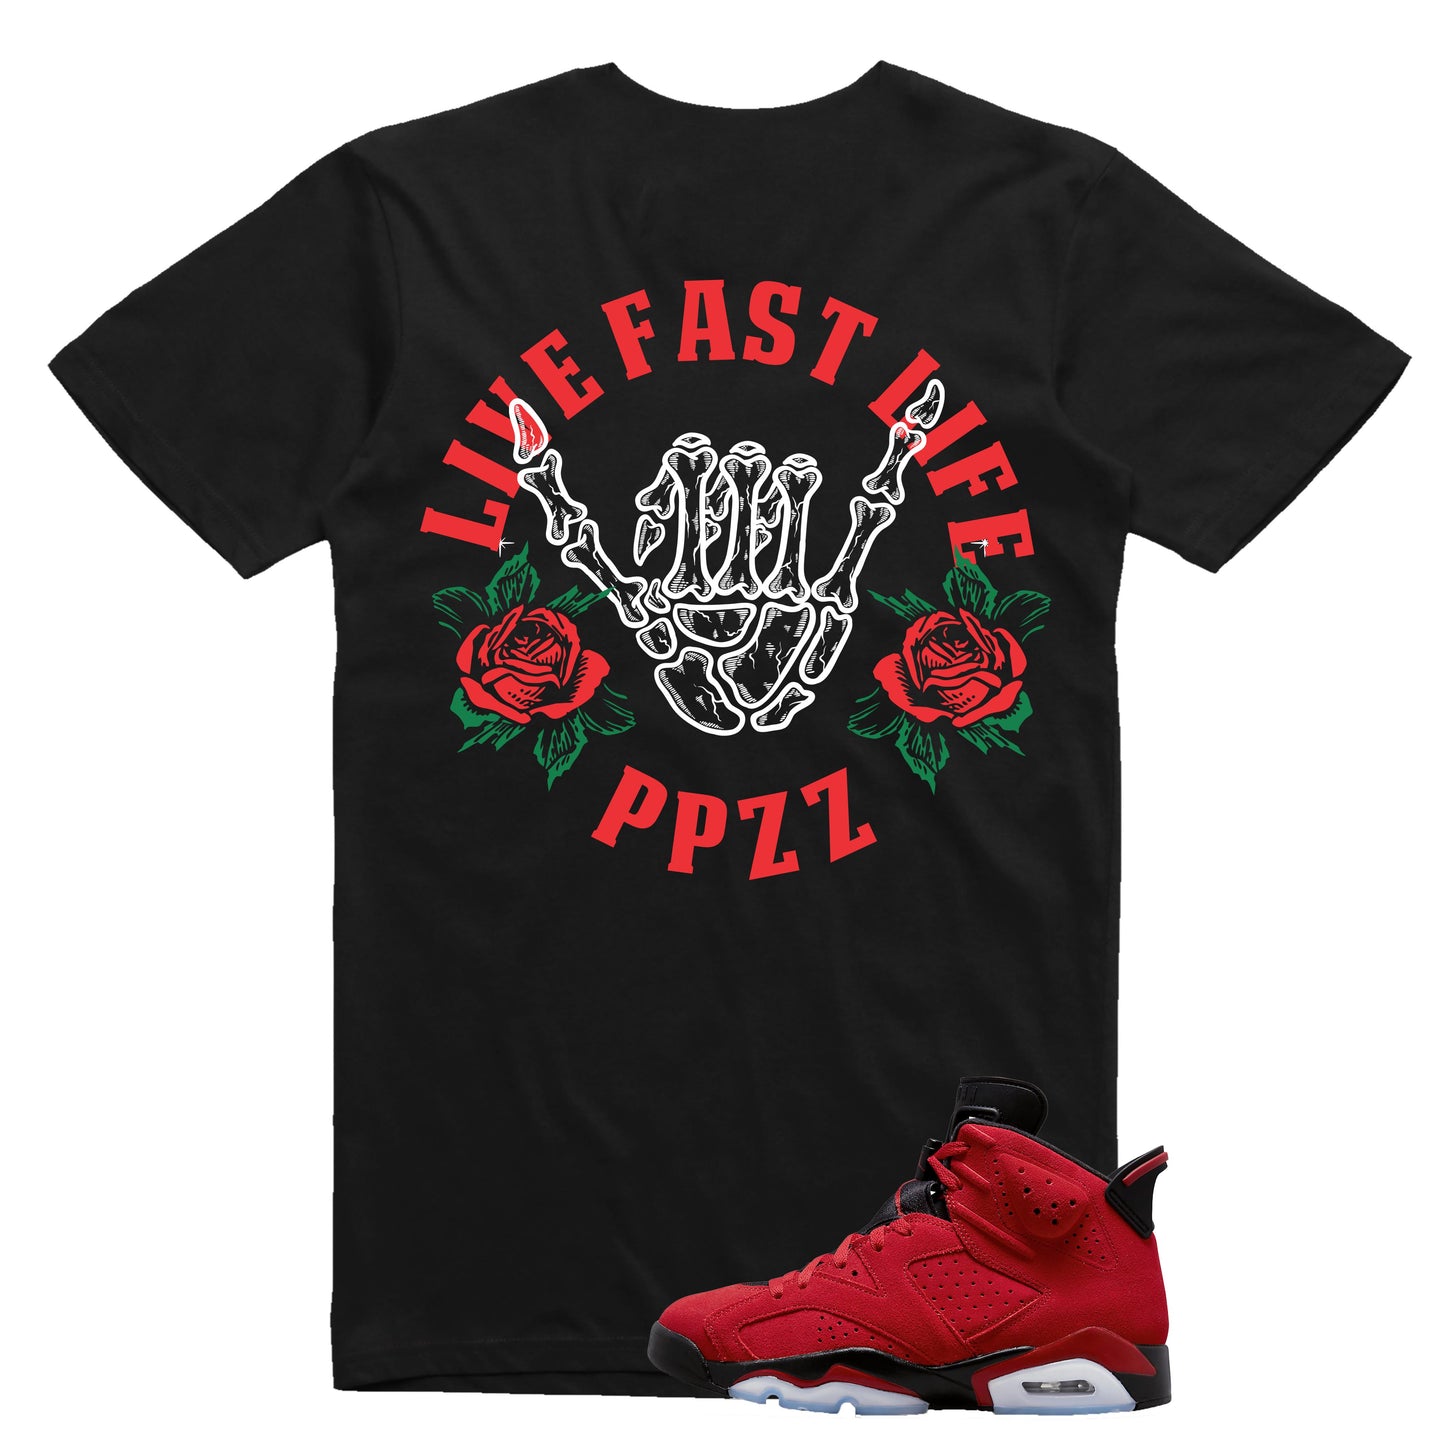 PPZZ Live Fast Life Tee (Blk/Red/Grn) /D3